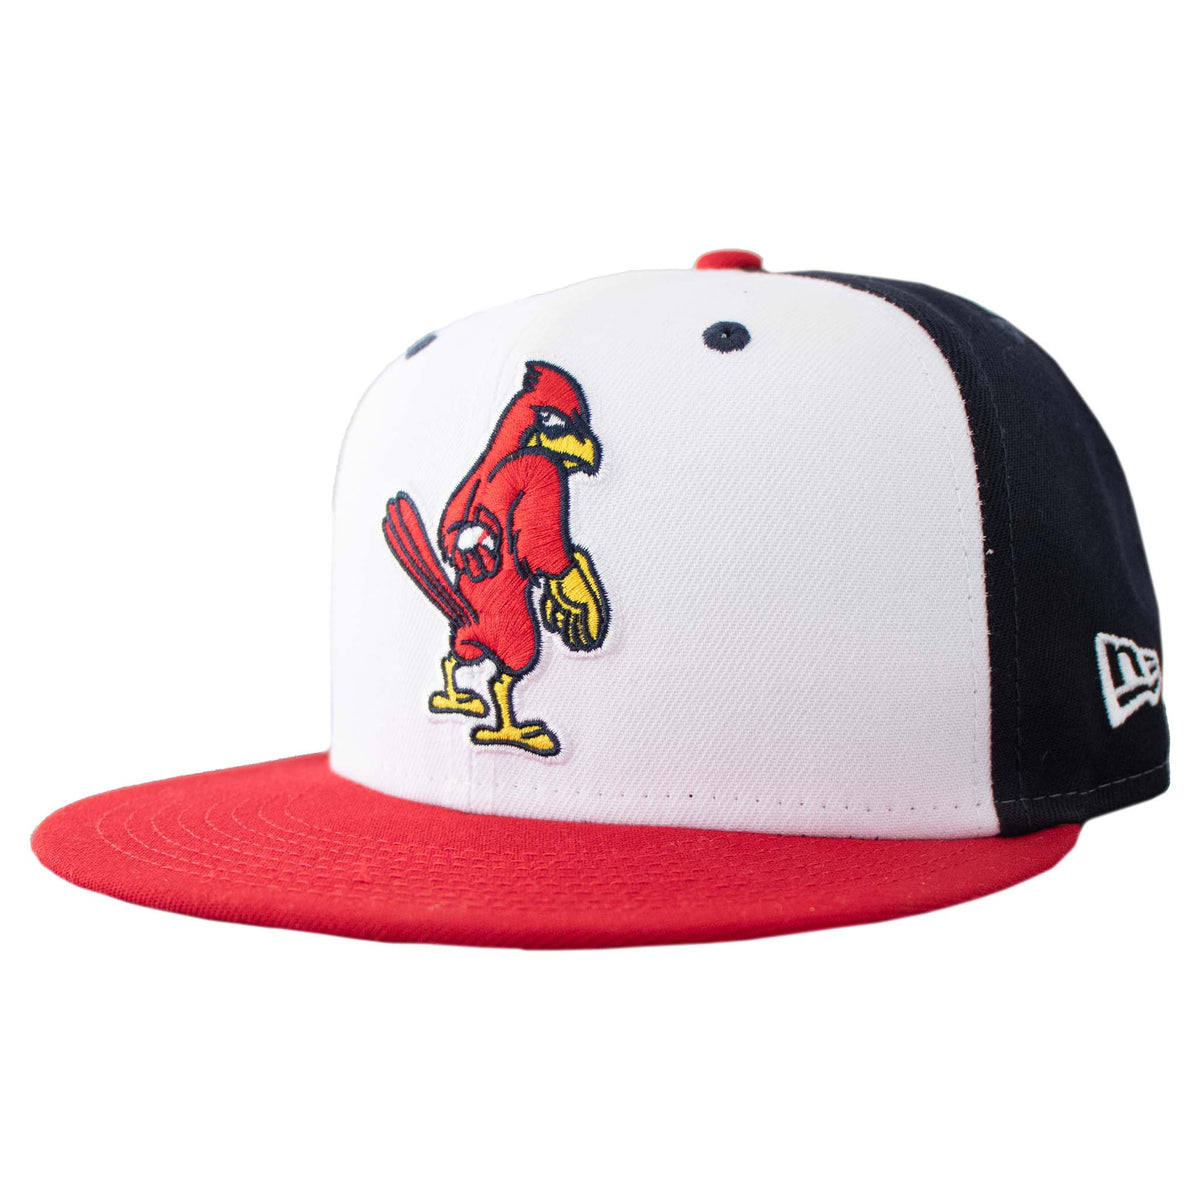 New Era Memphis Redbirds Triple A Championship 2019 Two Tone Edition  59Fifty Fitted Hat, EXCLUSIVE HATS, CAPS